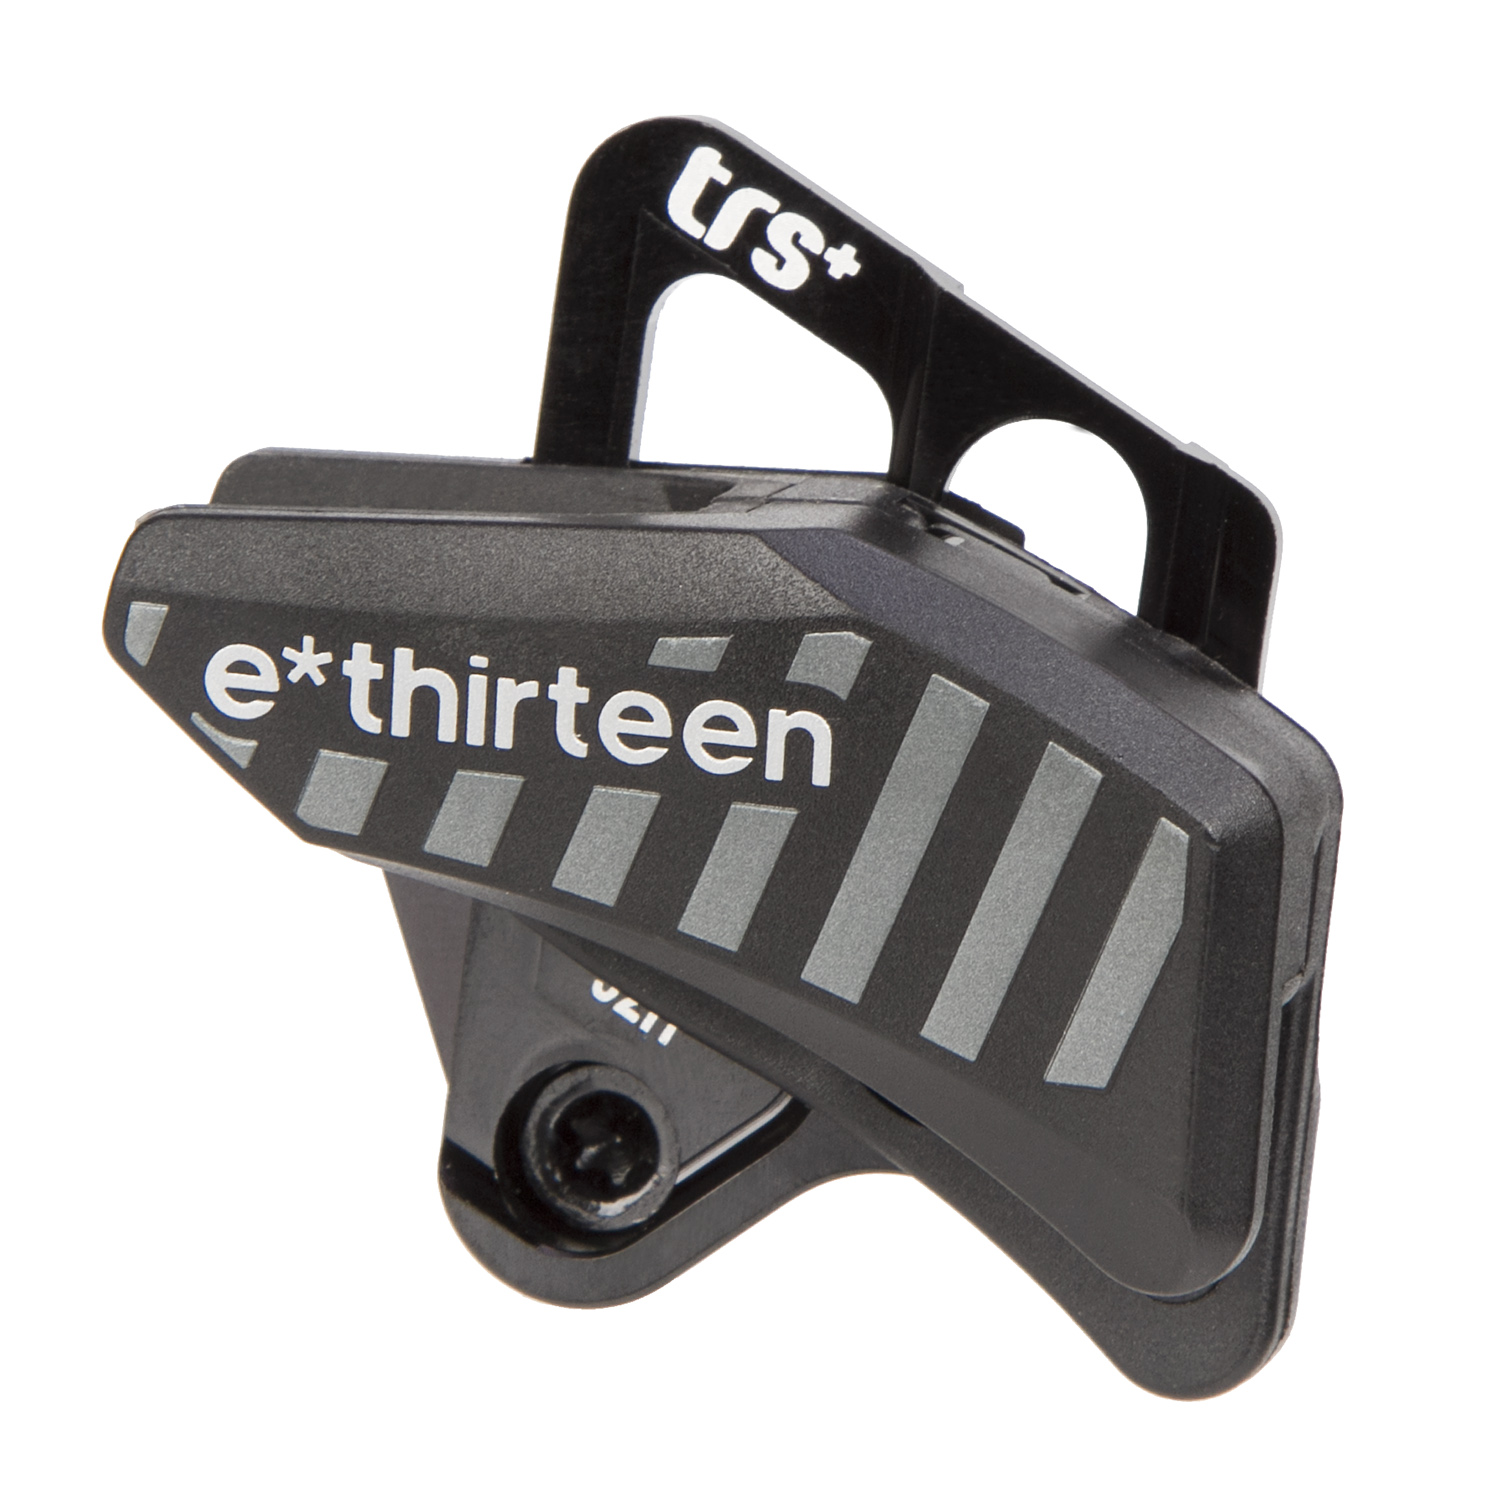 E*thirteen Chain Guide TRS+ Black, 28-38 Teeth, Low Direct Mount/S3